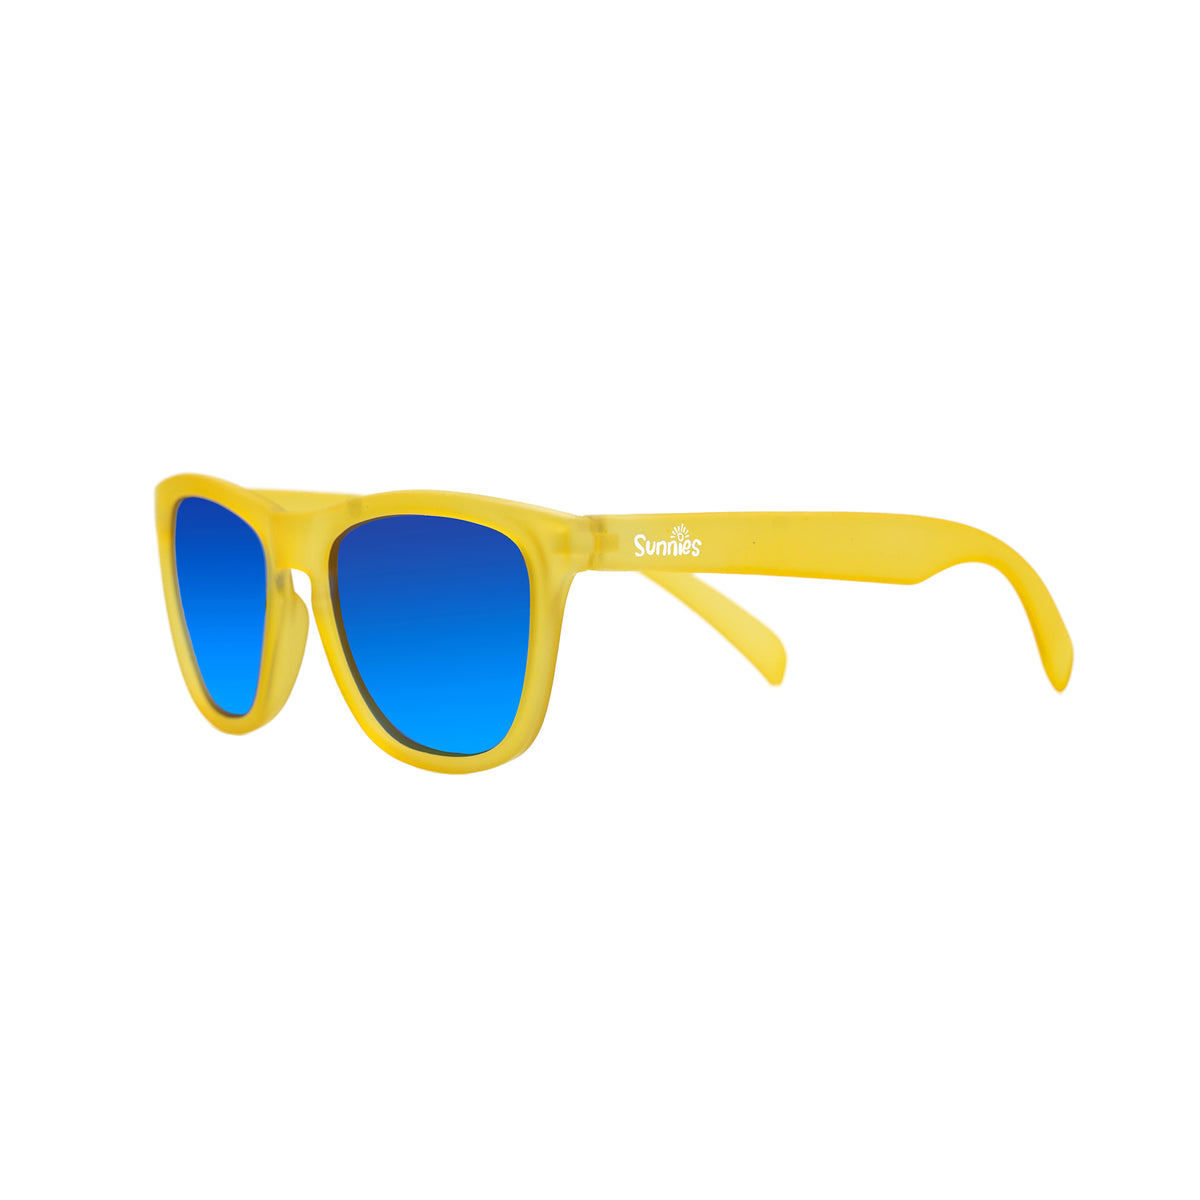 Yellow kids sunglasses with a transparent frame and polarized, reflective blue lenses